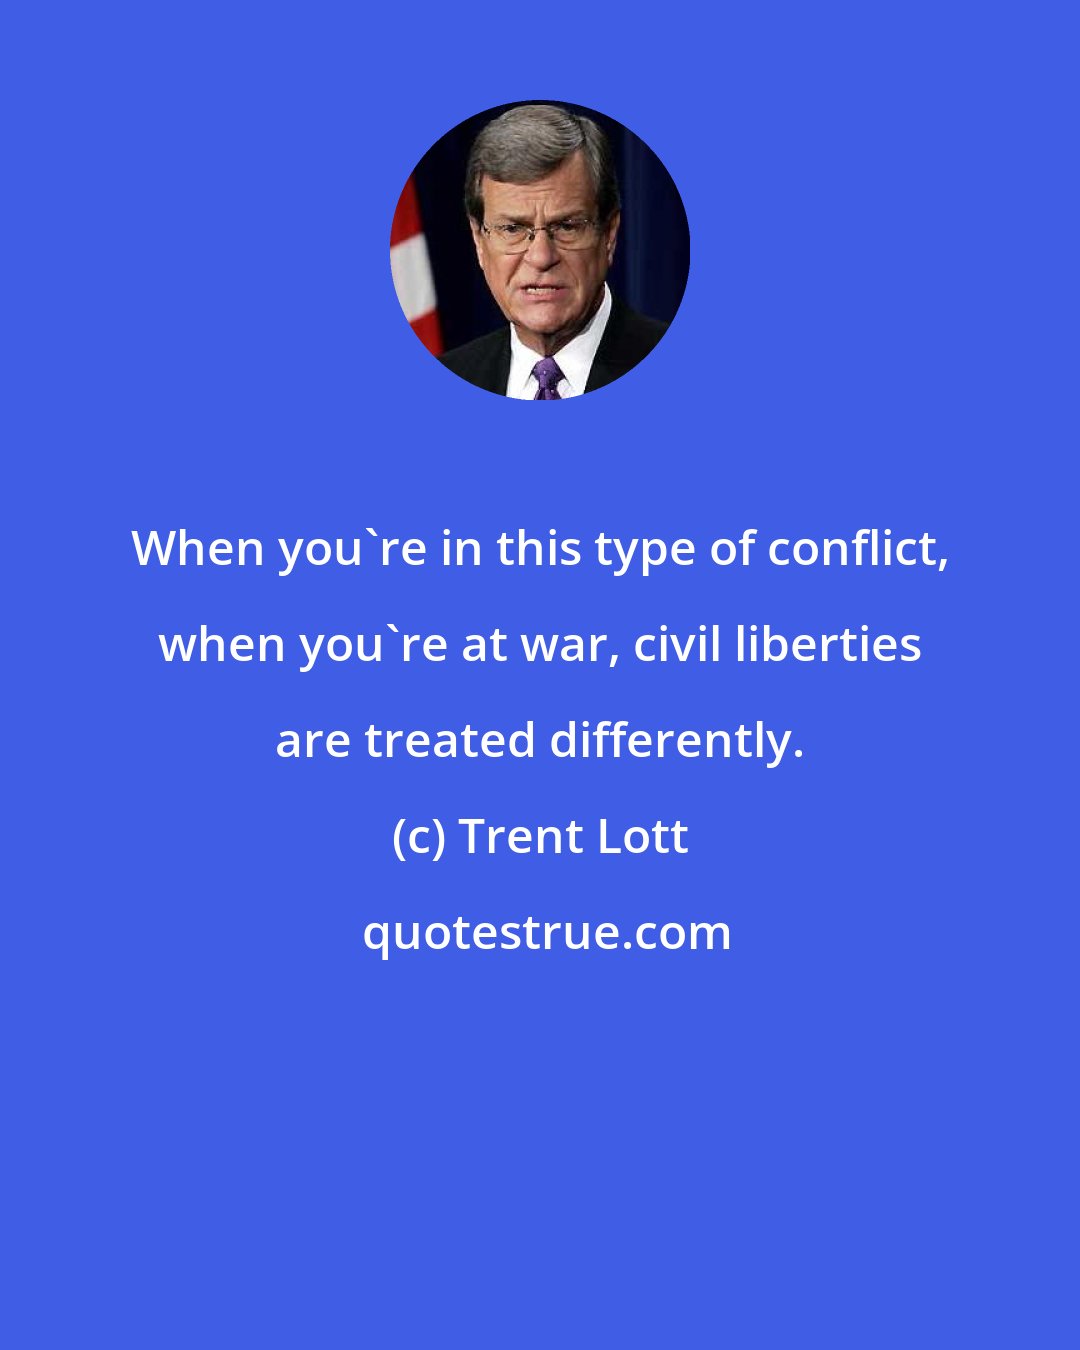 Trent Lott: When you're in this type of conflict, when you're at war, civil liberties are treated differently.